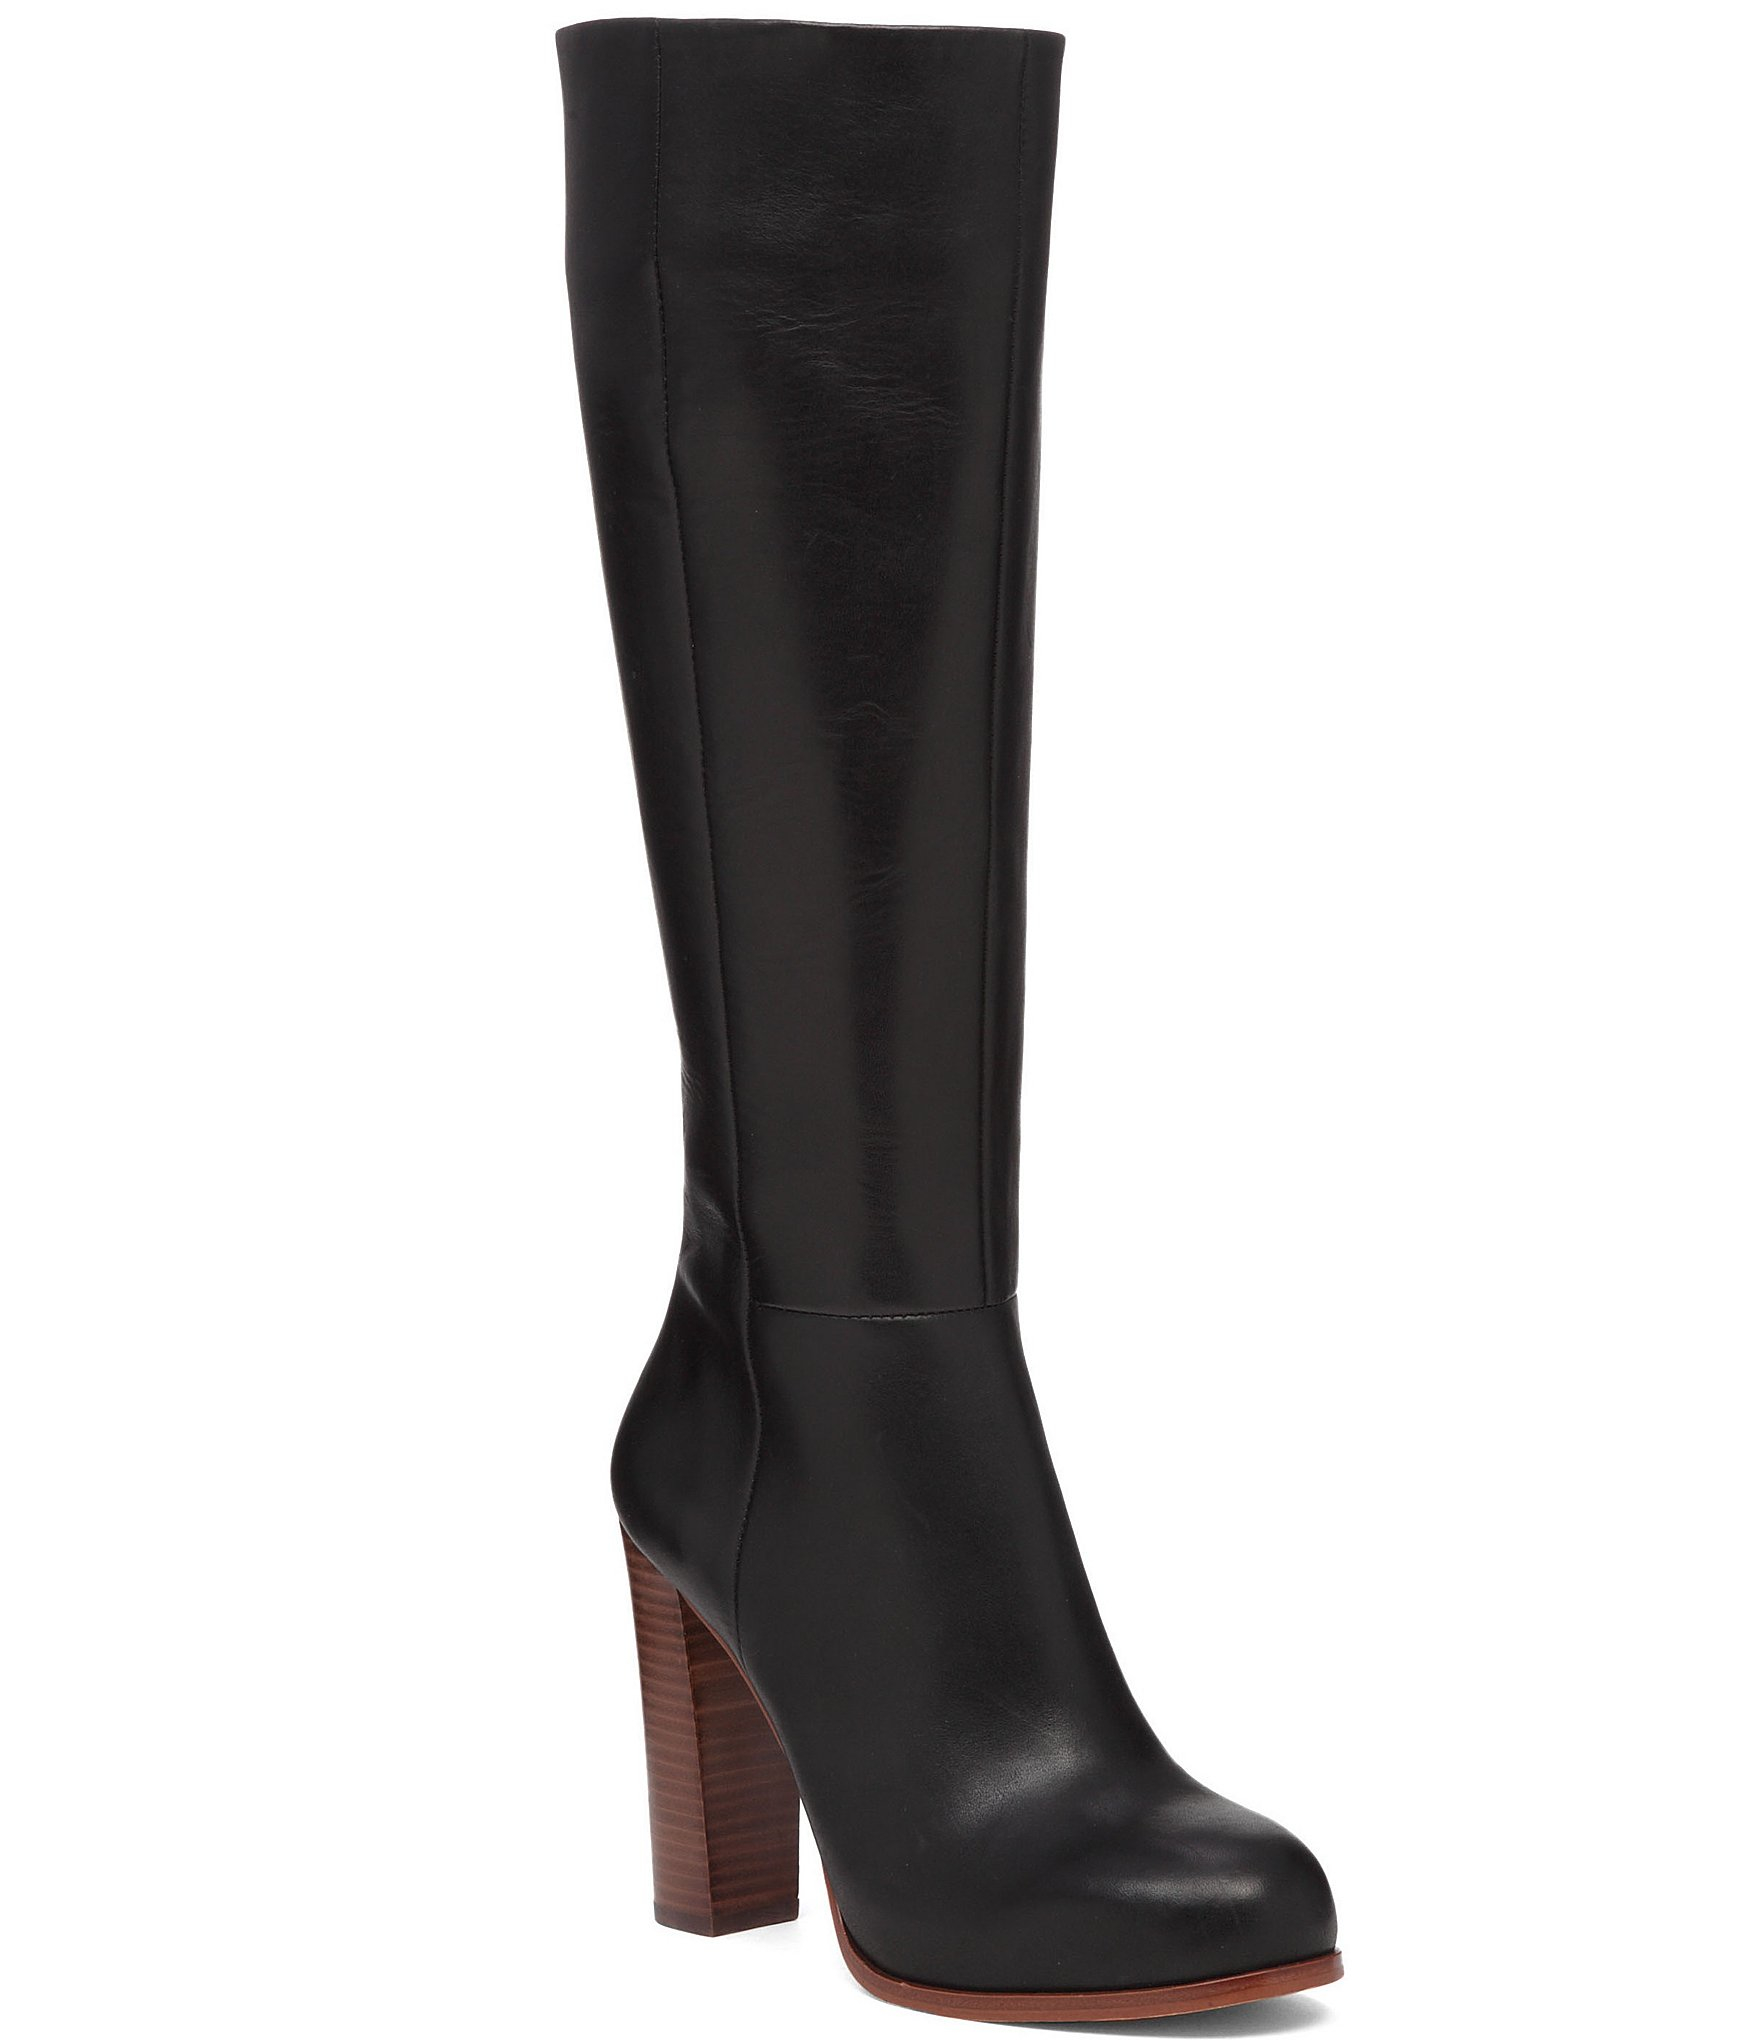 Vince camuto 'gretcha' Knee High Boot in Black | Lyst1760 x 2040